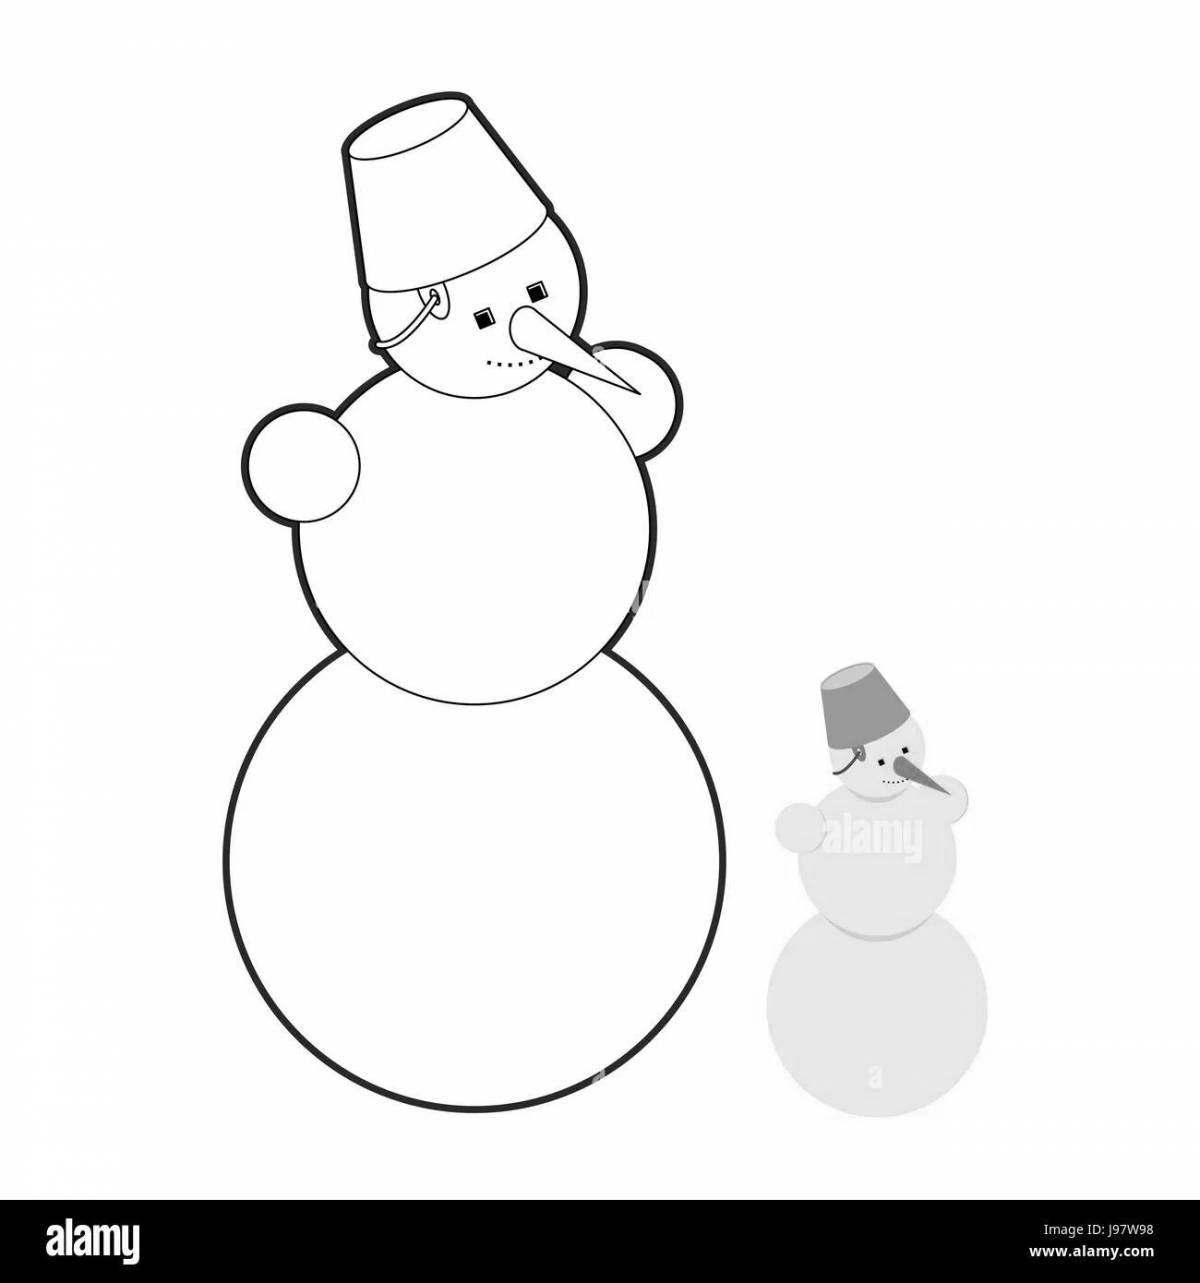 Radiant coloring snowman without a nose